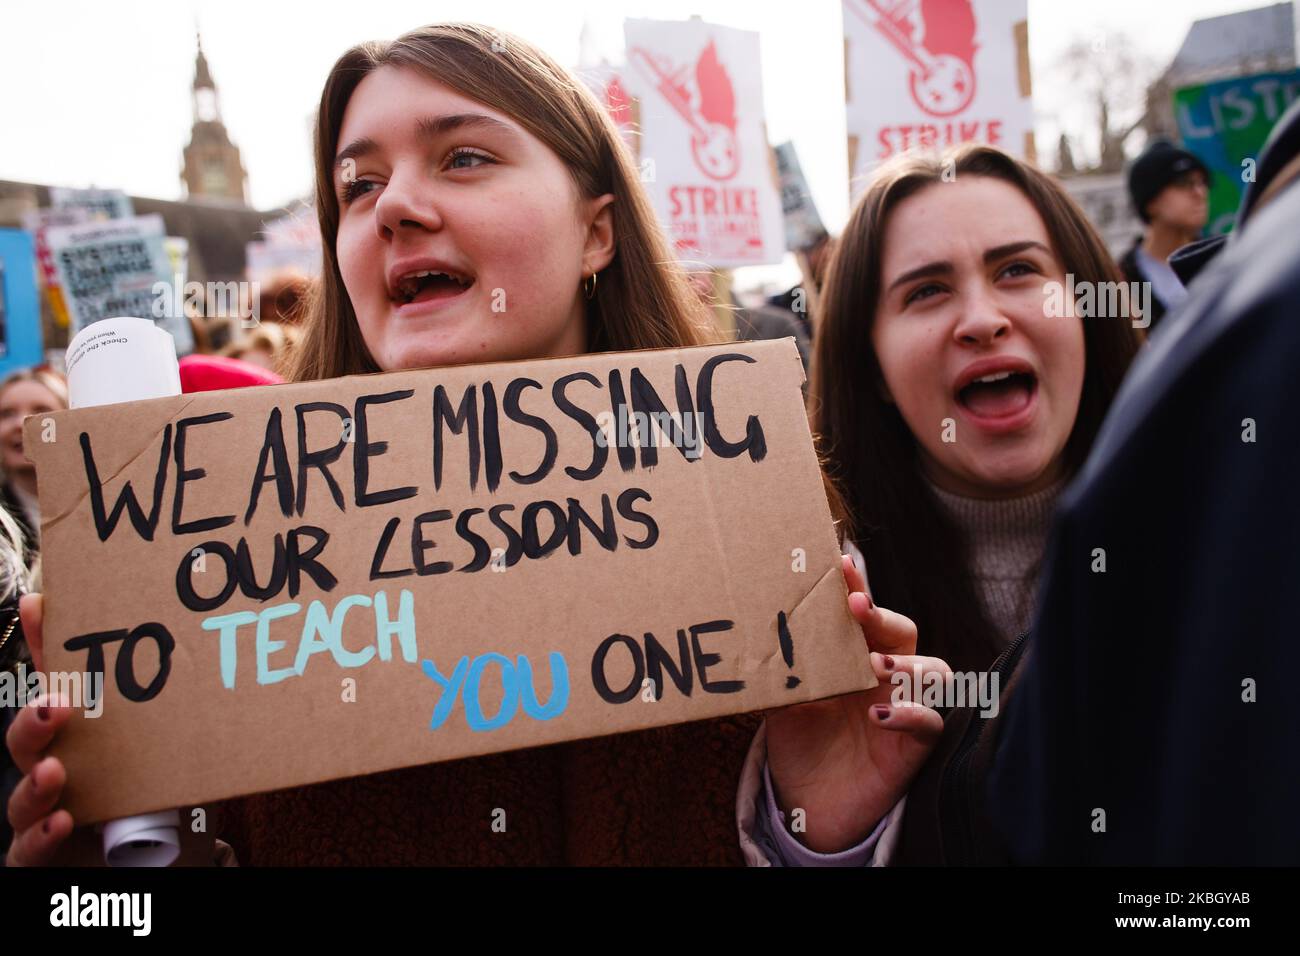 Young environmentalists take part in a 'climate strike' demonstration organised by the youth-led 'Fridays For Future' activist movement in Parliament Square in London, England, on February 14, 2020. The event marks one year since the first global wave of climate strike protests brought hundreds of thousands of schoolchildren onto the streets in cities around the world to call for greater action from governments to tackle the climate crisis. Several such coordinated global events have since been held, with worldwide climate activism over the past year further bolstered by the tandem growth of t Stock Photo